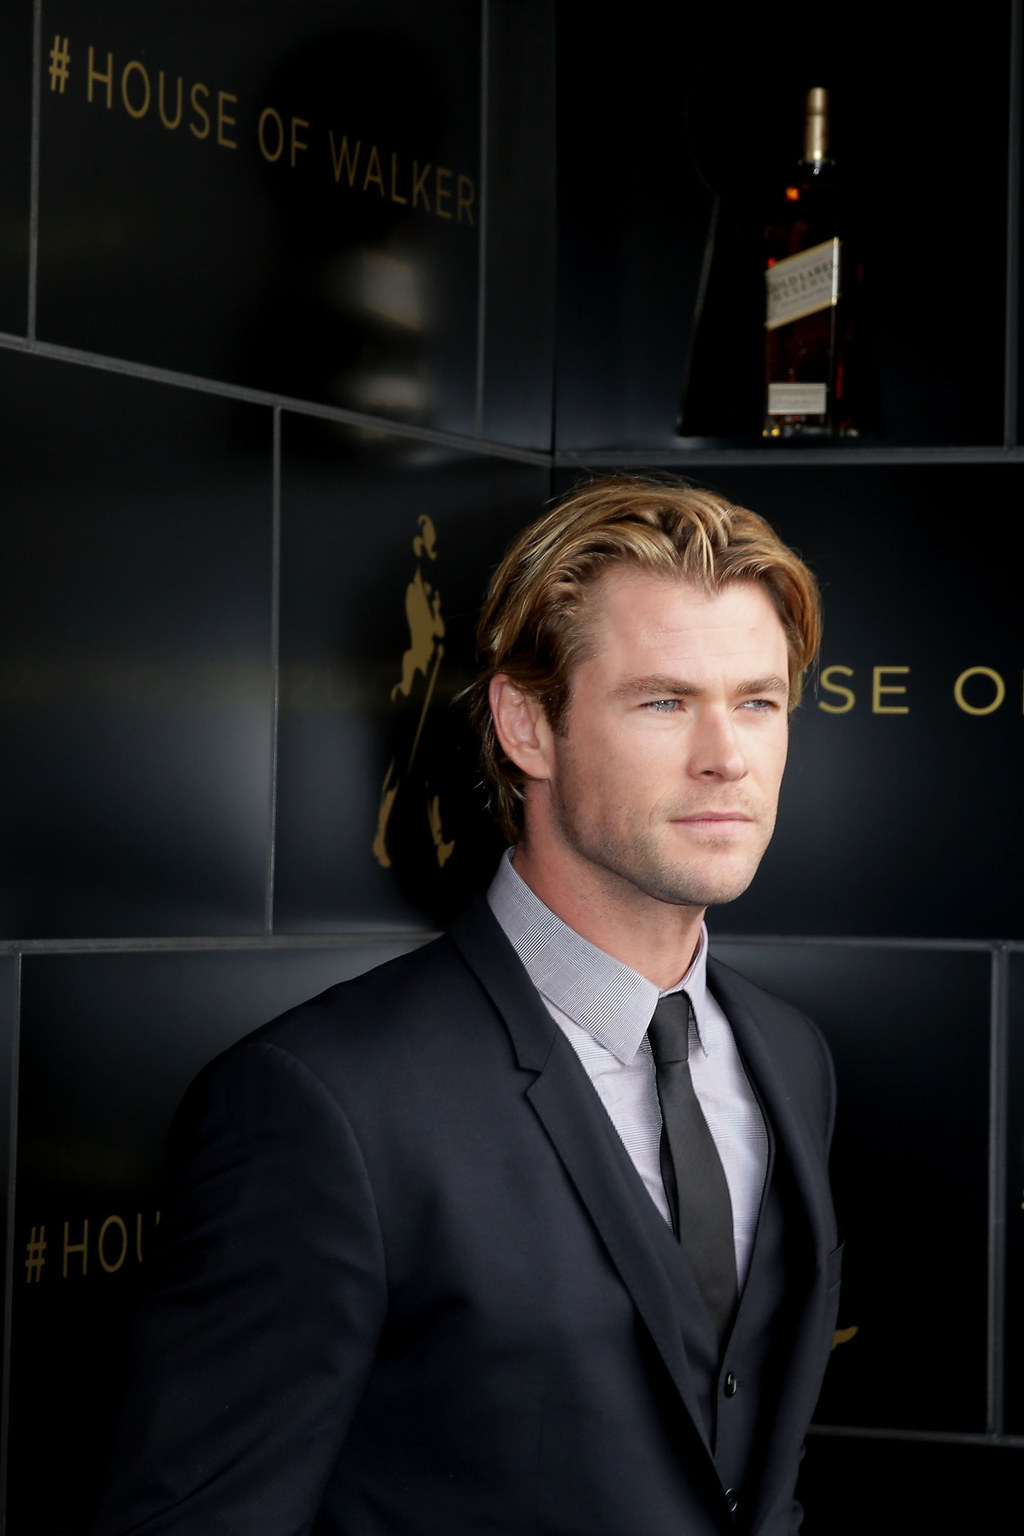 17 Times The Hemsworth Brothers Made You Wish You Were Dating The ...